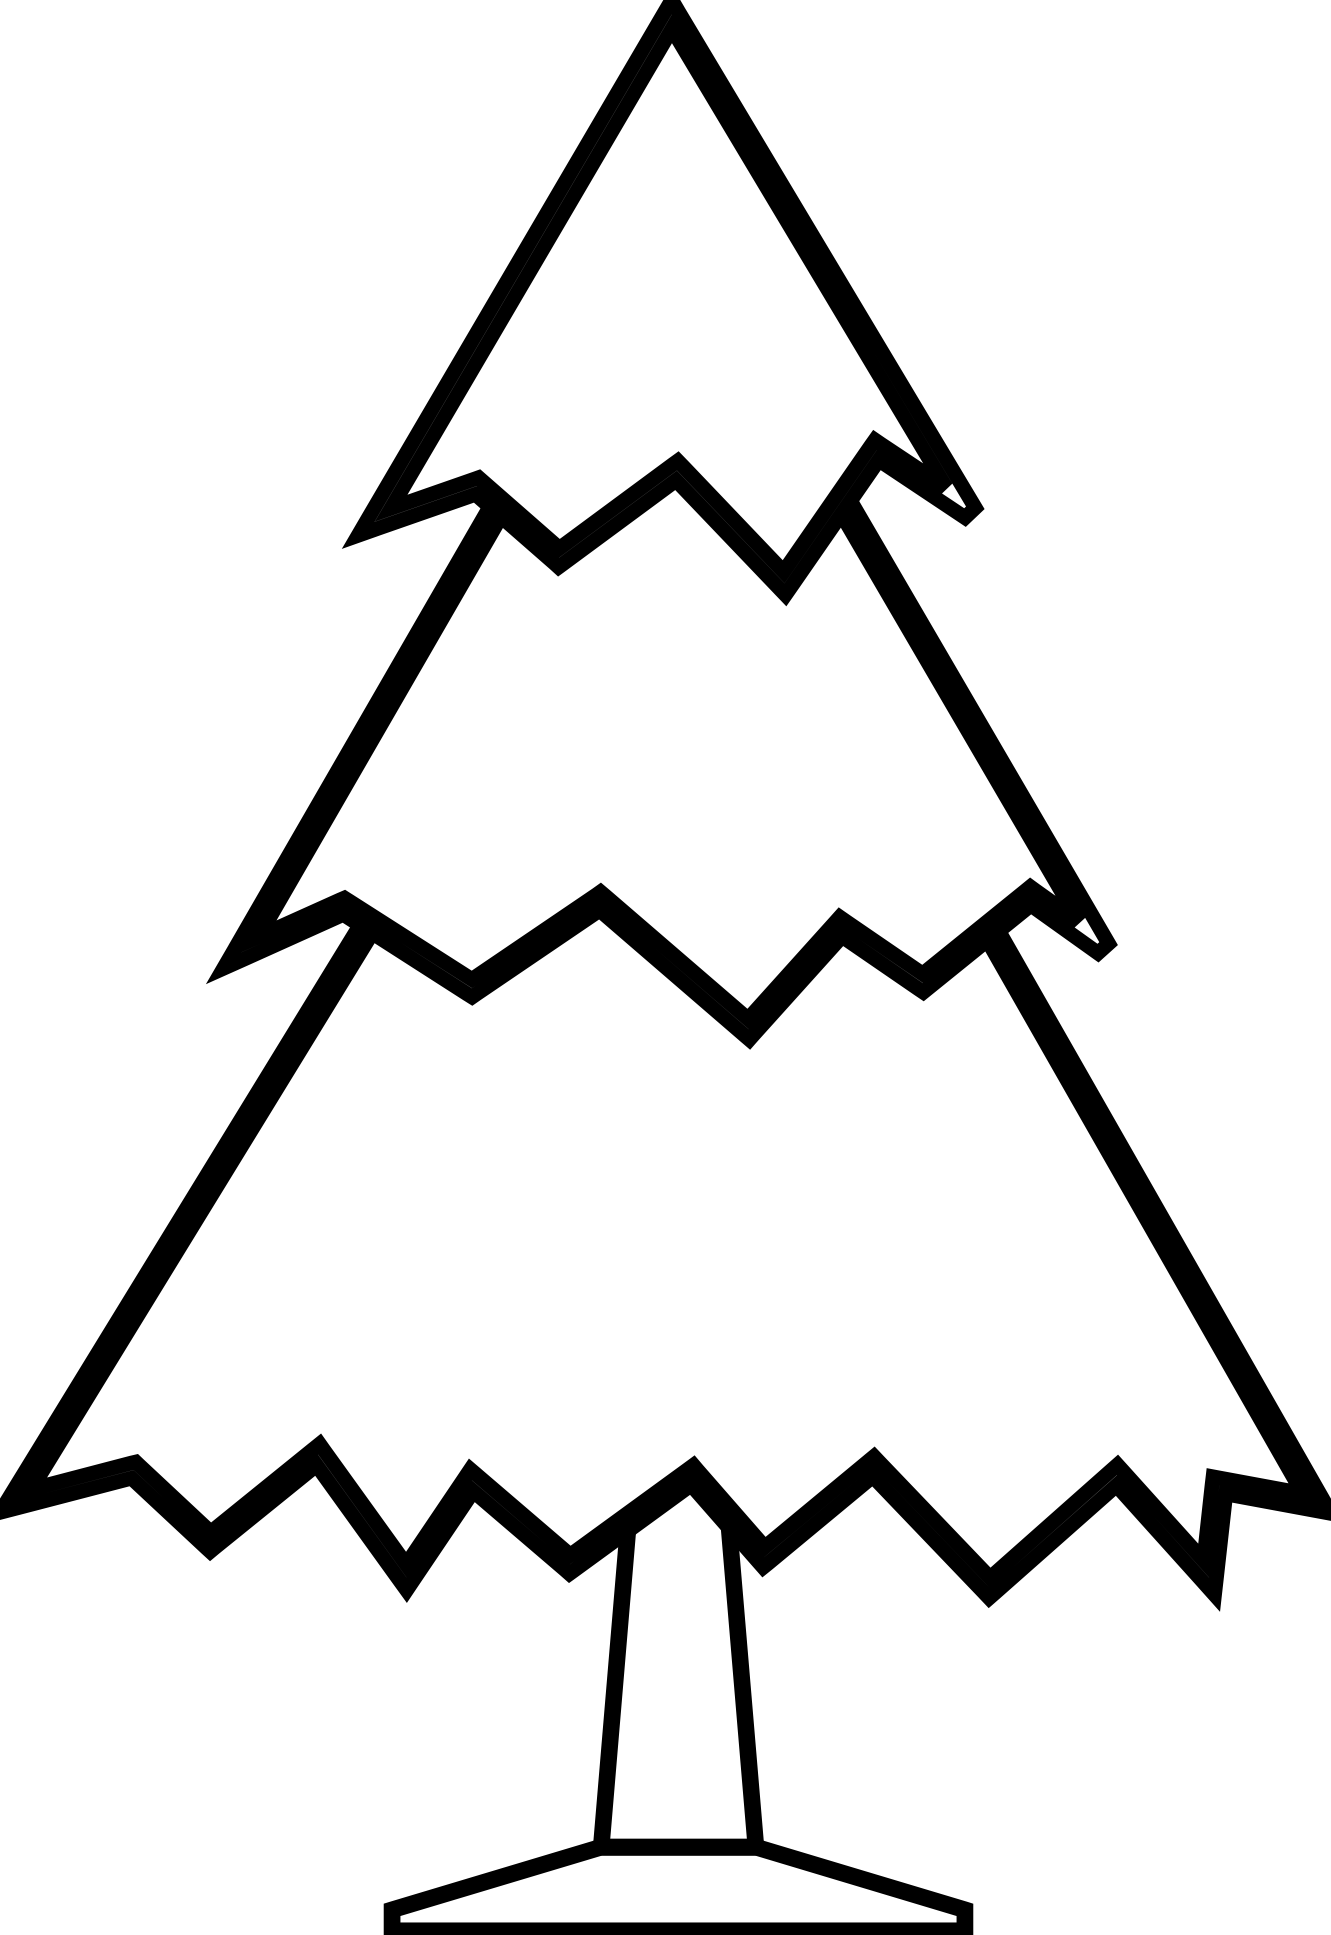 Black And White Pine Tree Clipart - Gallery